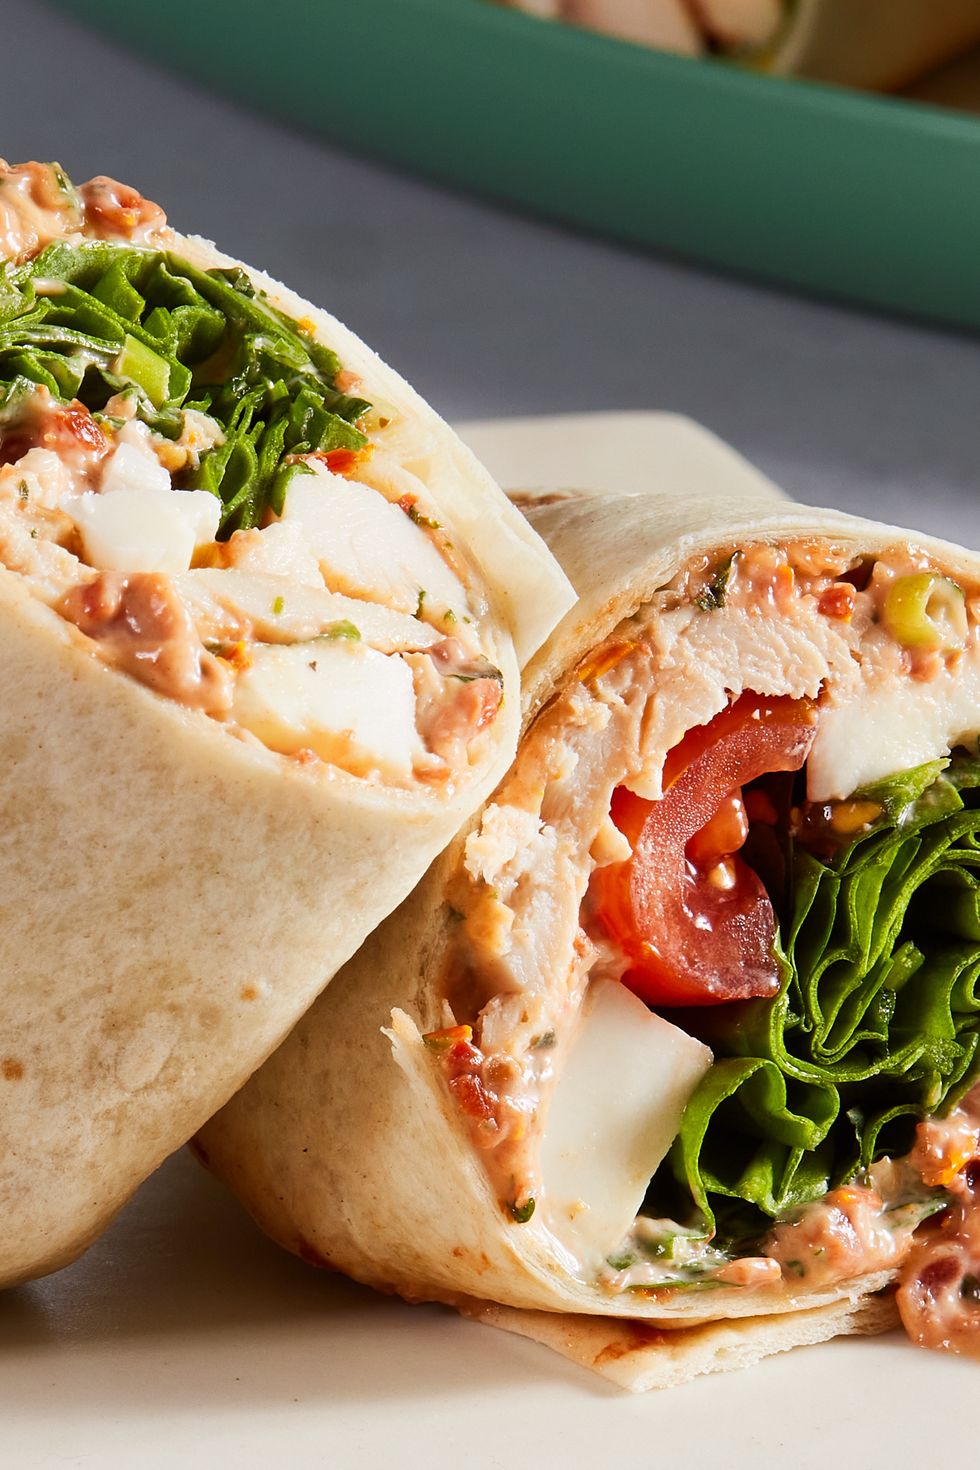 whole wheat wrap spread with parmesan herb mayonnaise and wrapped around chopped rotisserie chicken, creamy fresh mozzarella, spinach, and cherry tomatoes